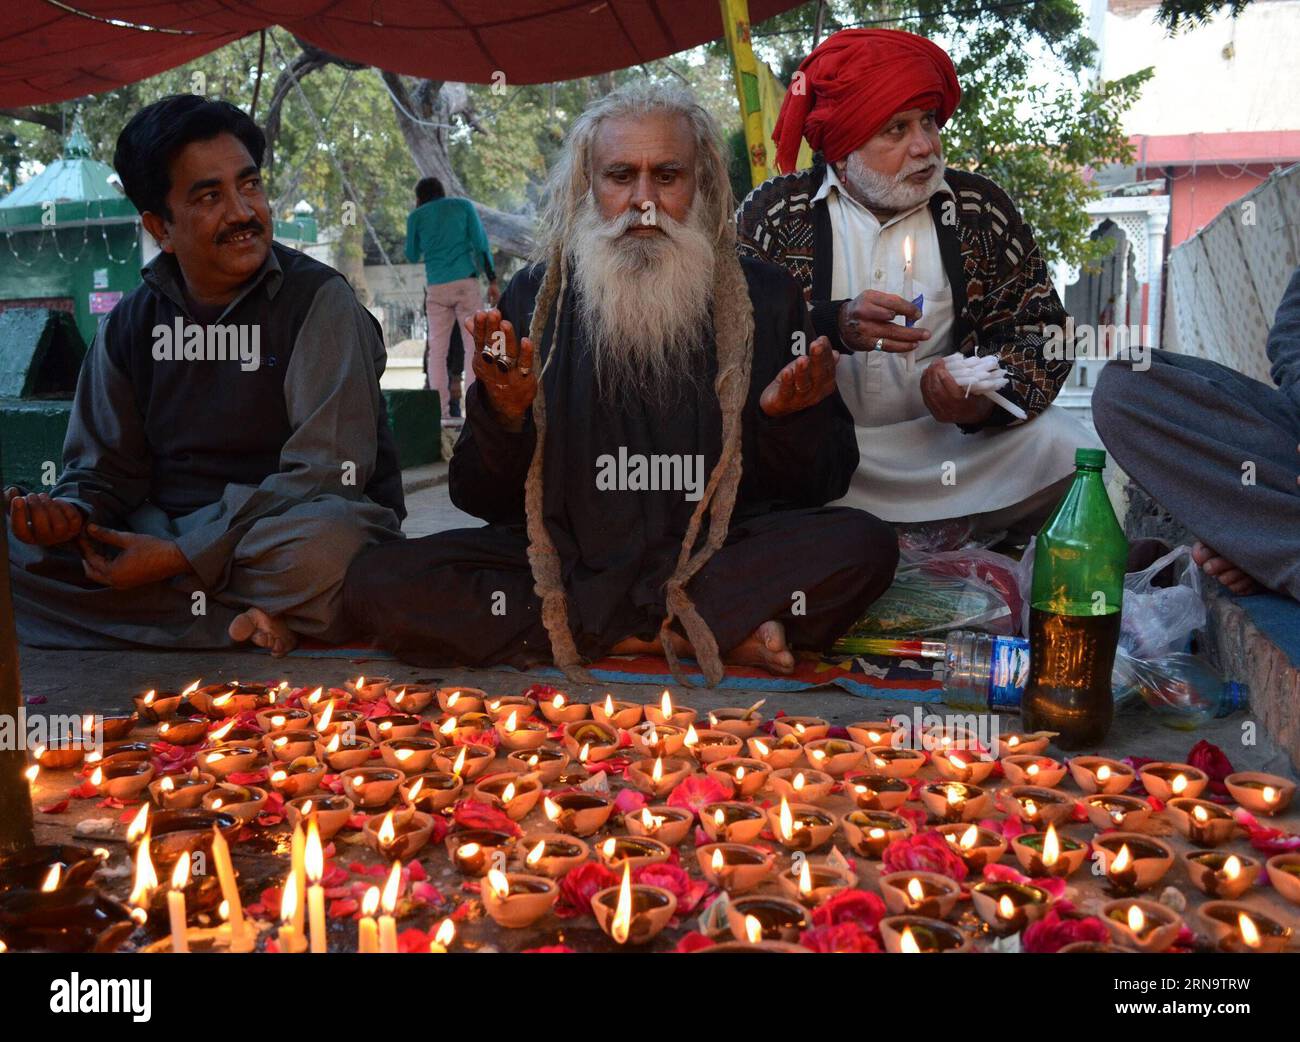 (151220) -- LAHORE, Dec. 19, 2015 -- Pakistani Muslim devotees pray at the shrine of the Sufi saint Mian Mir Sahib during a festival to mark the saint s death anniversary in eastern Pakistan s Lahore, Dec. 19, 2015. Hundreds of devotees are attending the two-day festival. ) PAKISTAN-LAHORE-RELIGIOUS FESTIVAL JamilxAhmed PUBLICATIONxNOTxINxCHN   151220 Lahore DEC 19 2015 Pakistani Muslim devotees Pray AT The Shrine of The Sufi Saint Mian me Sahib during a Festival to Mark The Saint S Death Anniversary in Eastern Pakistan S Lahore DEC 19 2015 hundreds of devotees are attending The Two Day Festiv Stock Photo